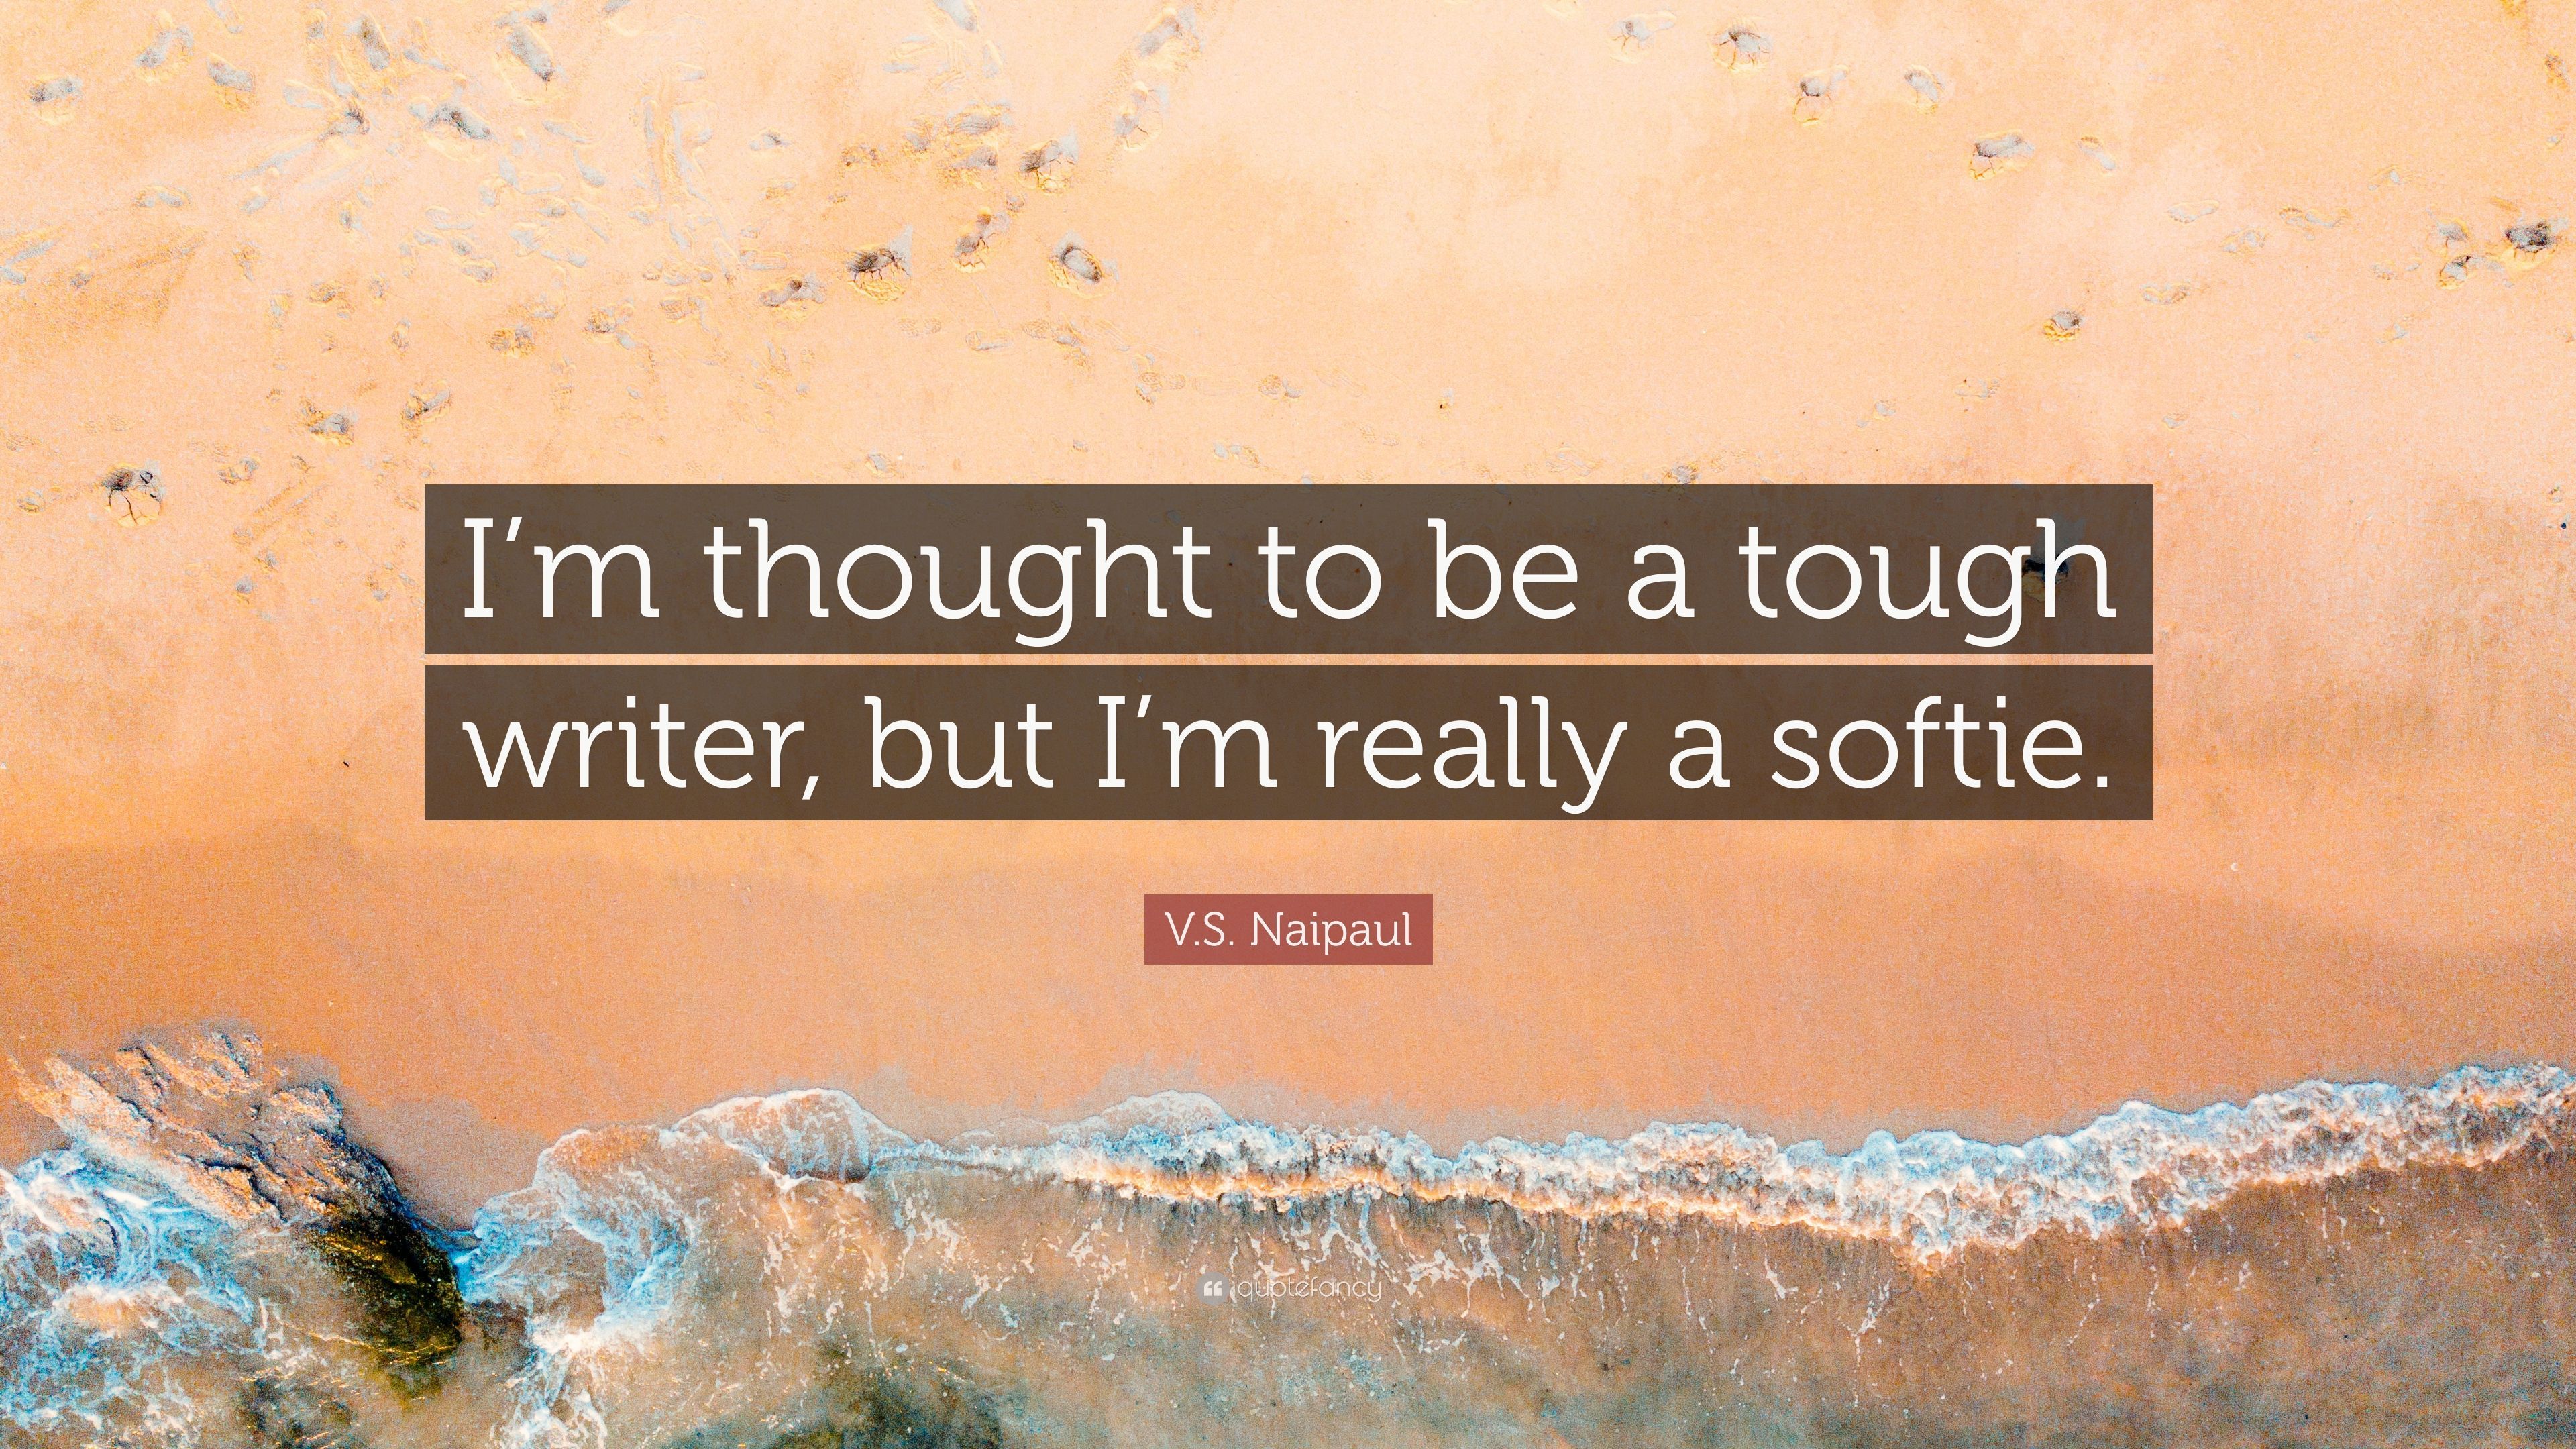 V.S. Naipaul Quote: “I'm thought to be a tough writer, but I'm